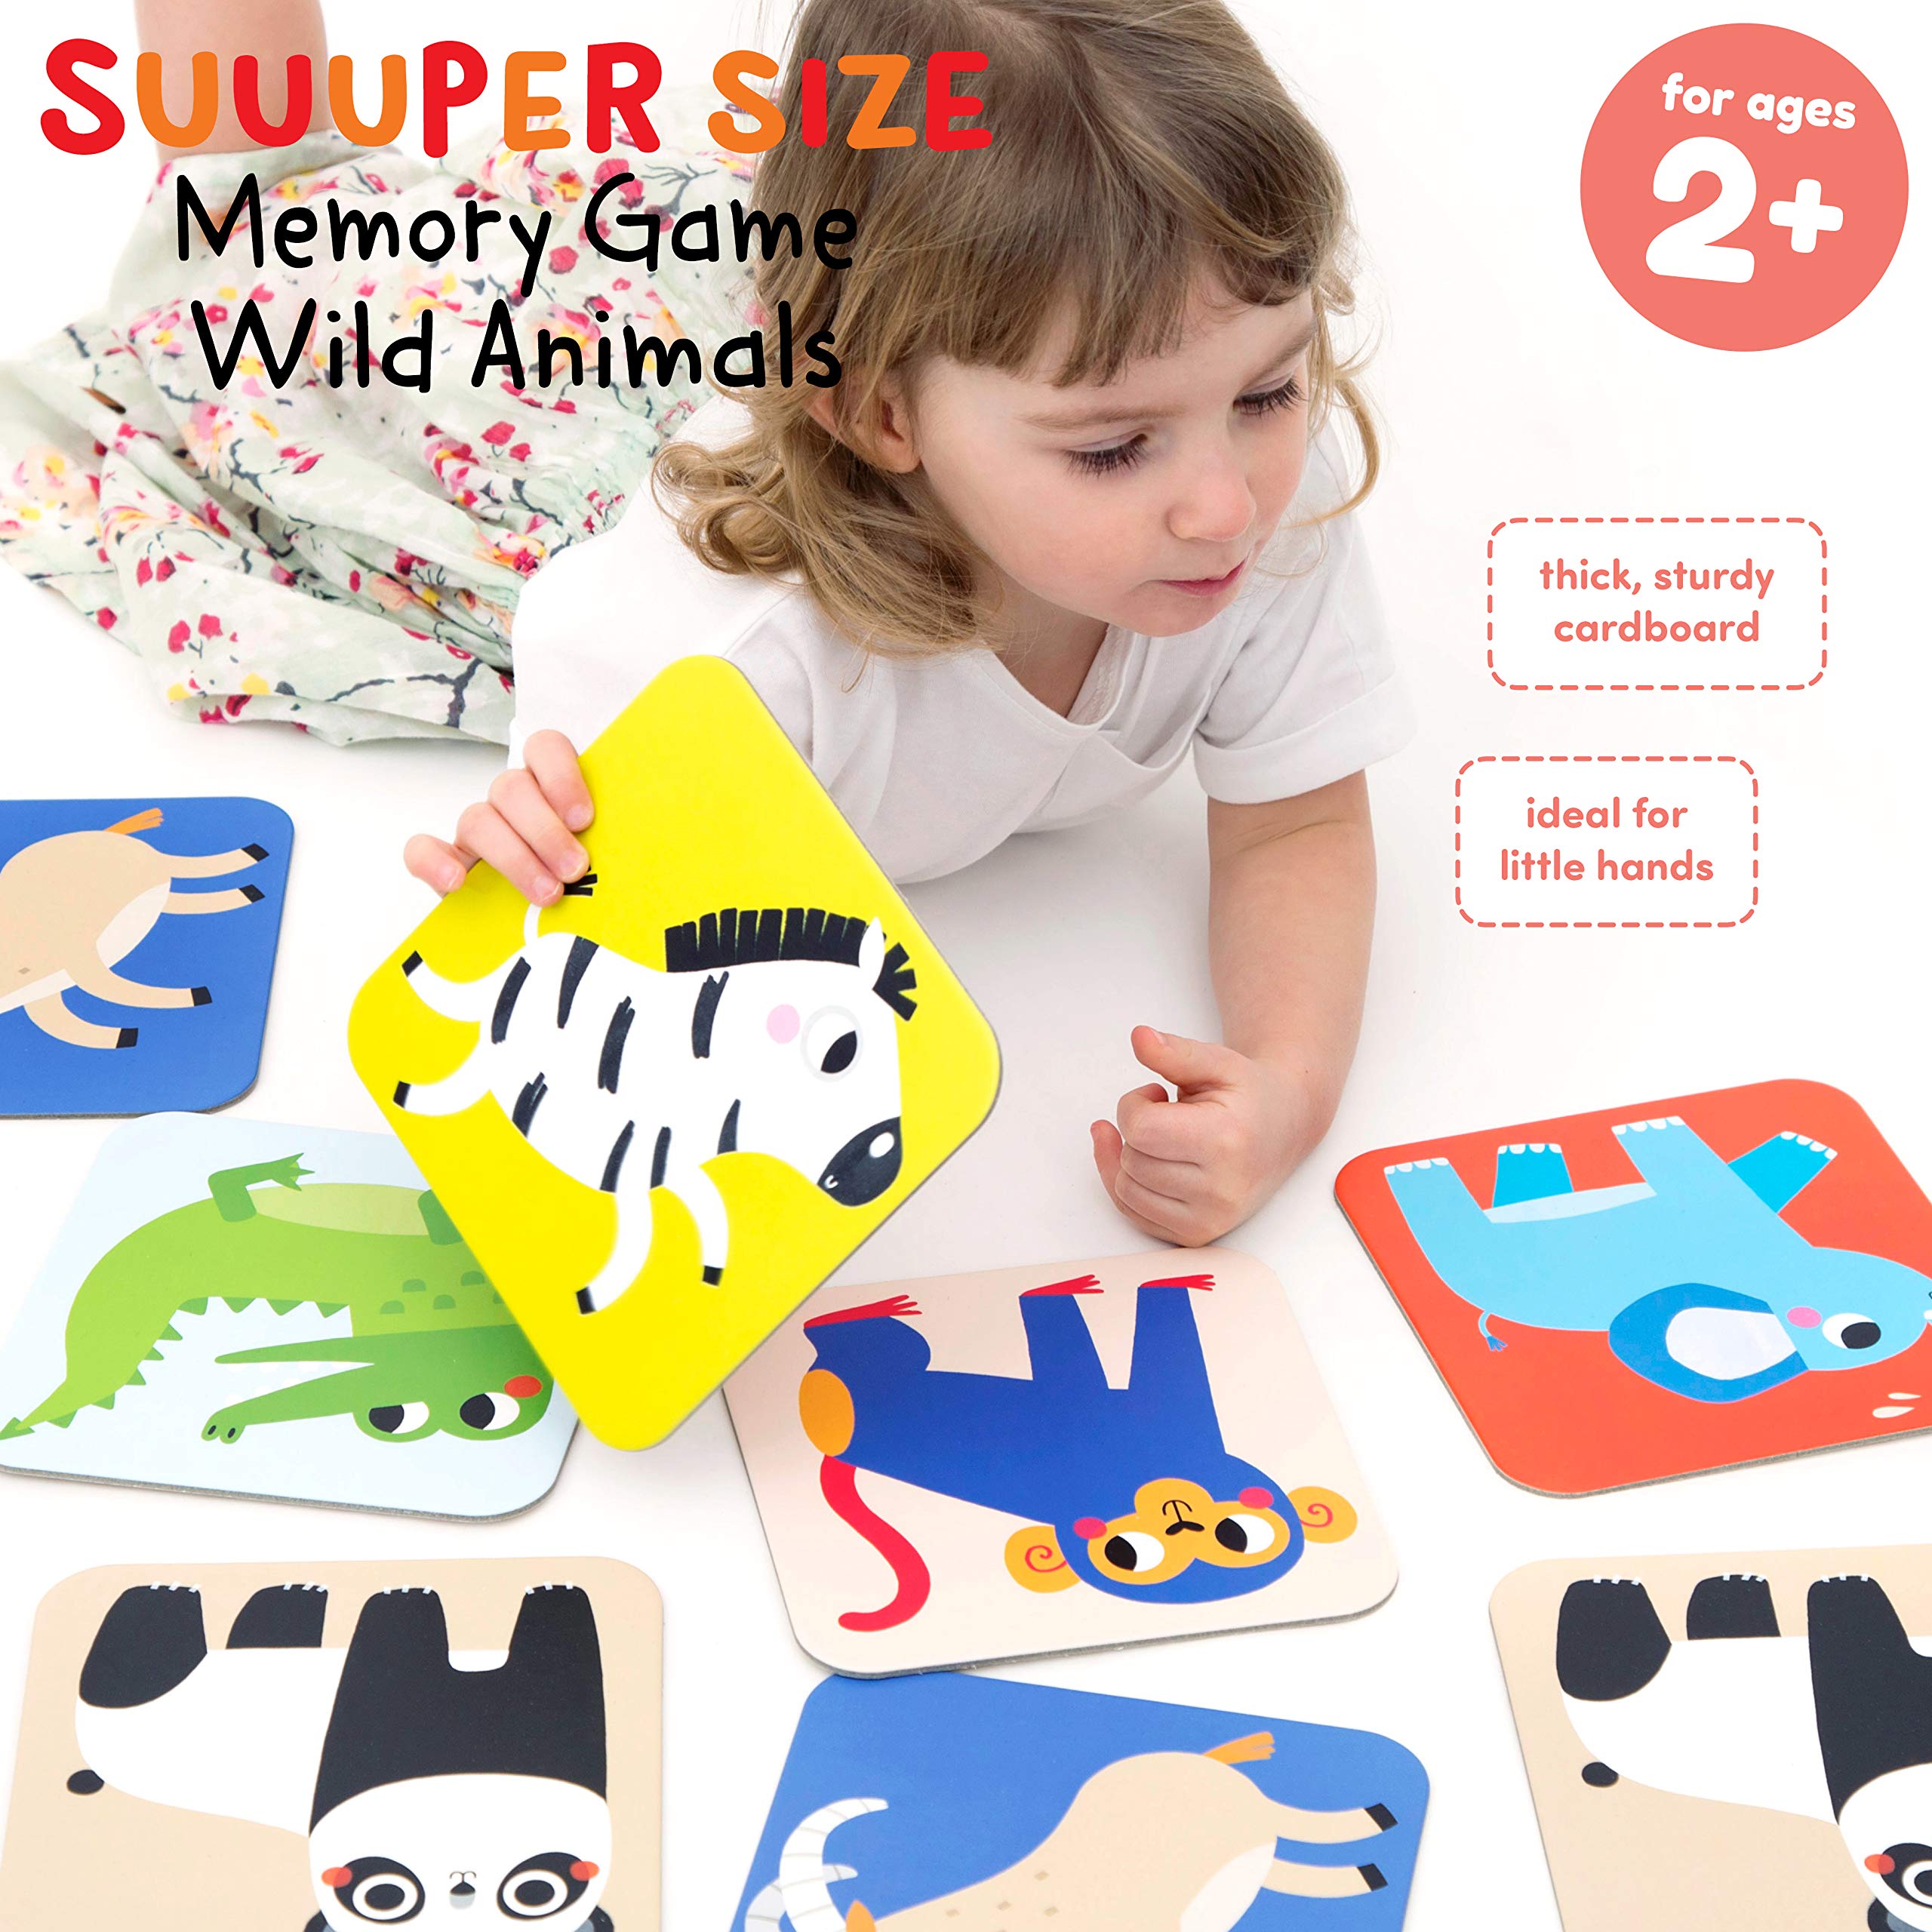 Banana Panda - Suuuper Size Memory Game Wild Animals - Educational Matching Activity for Kids Ages 2 Years +